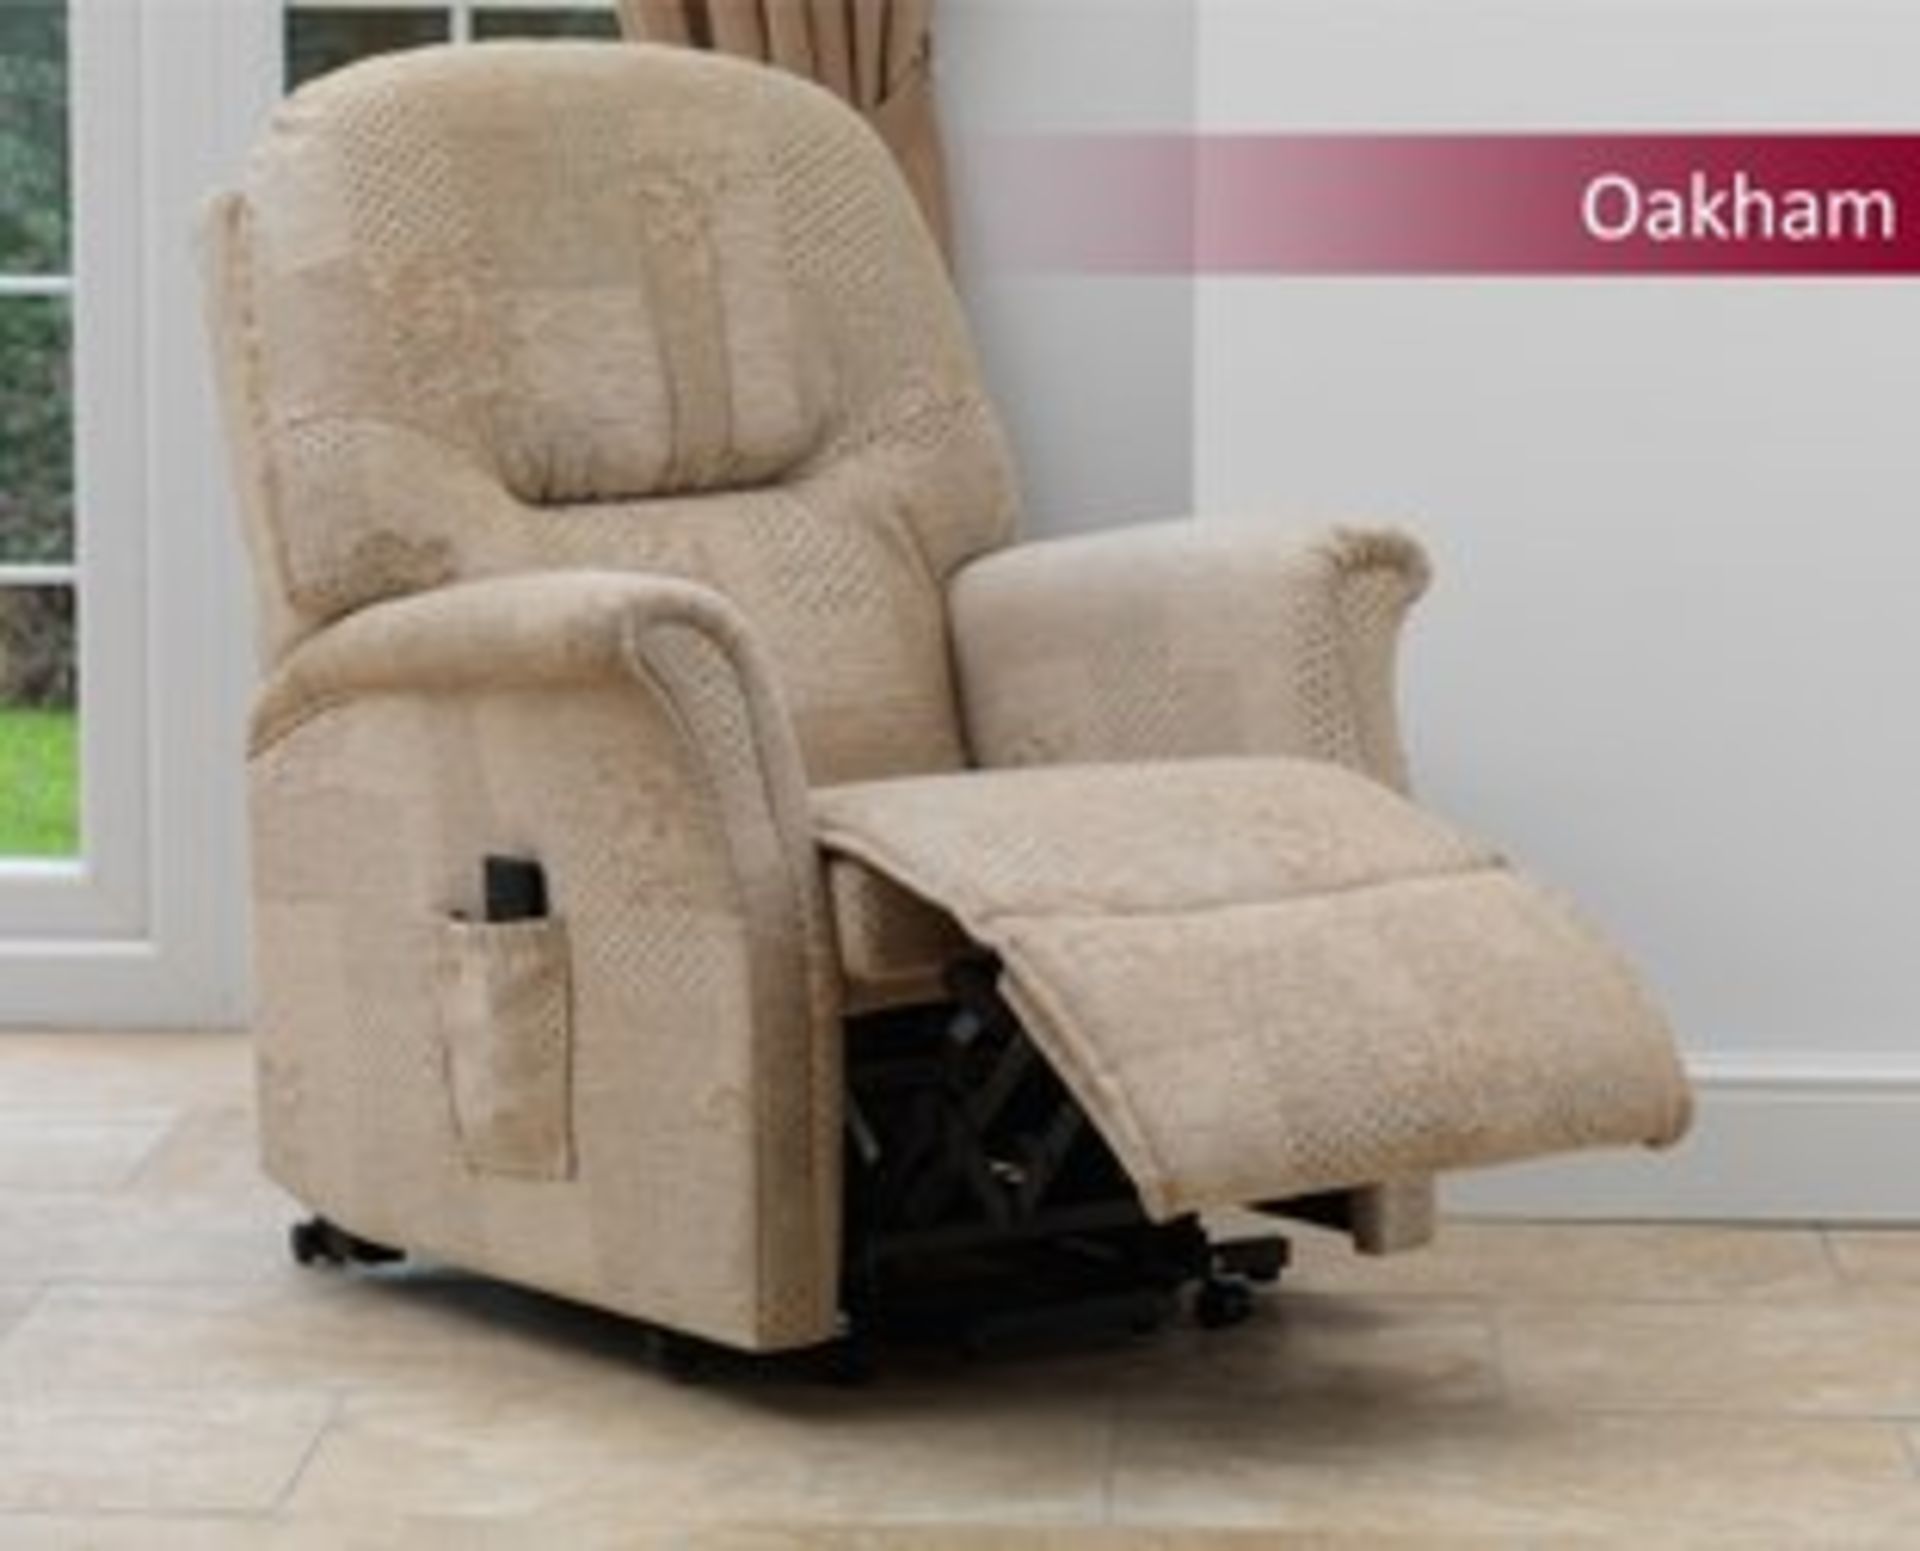 Brand new boxed direct from the manufacturers Oakham rise and recline electric chair